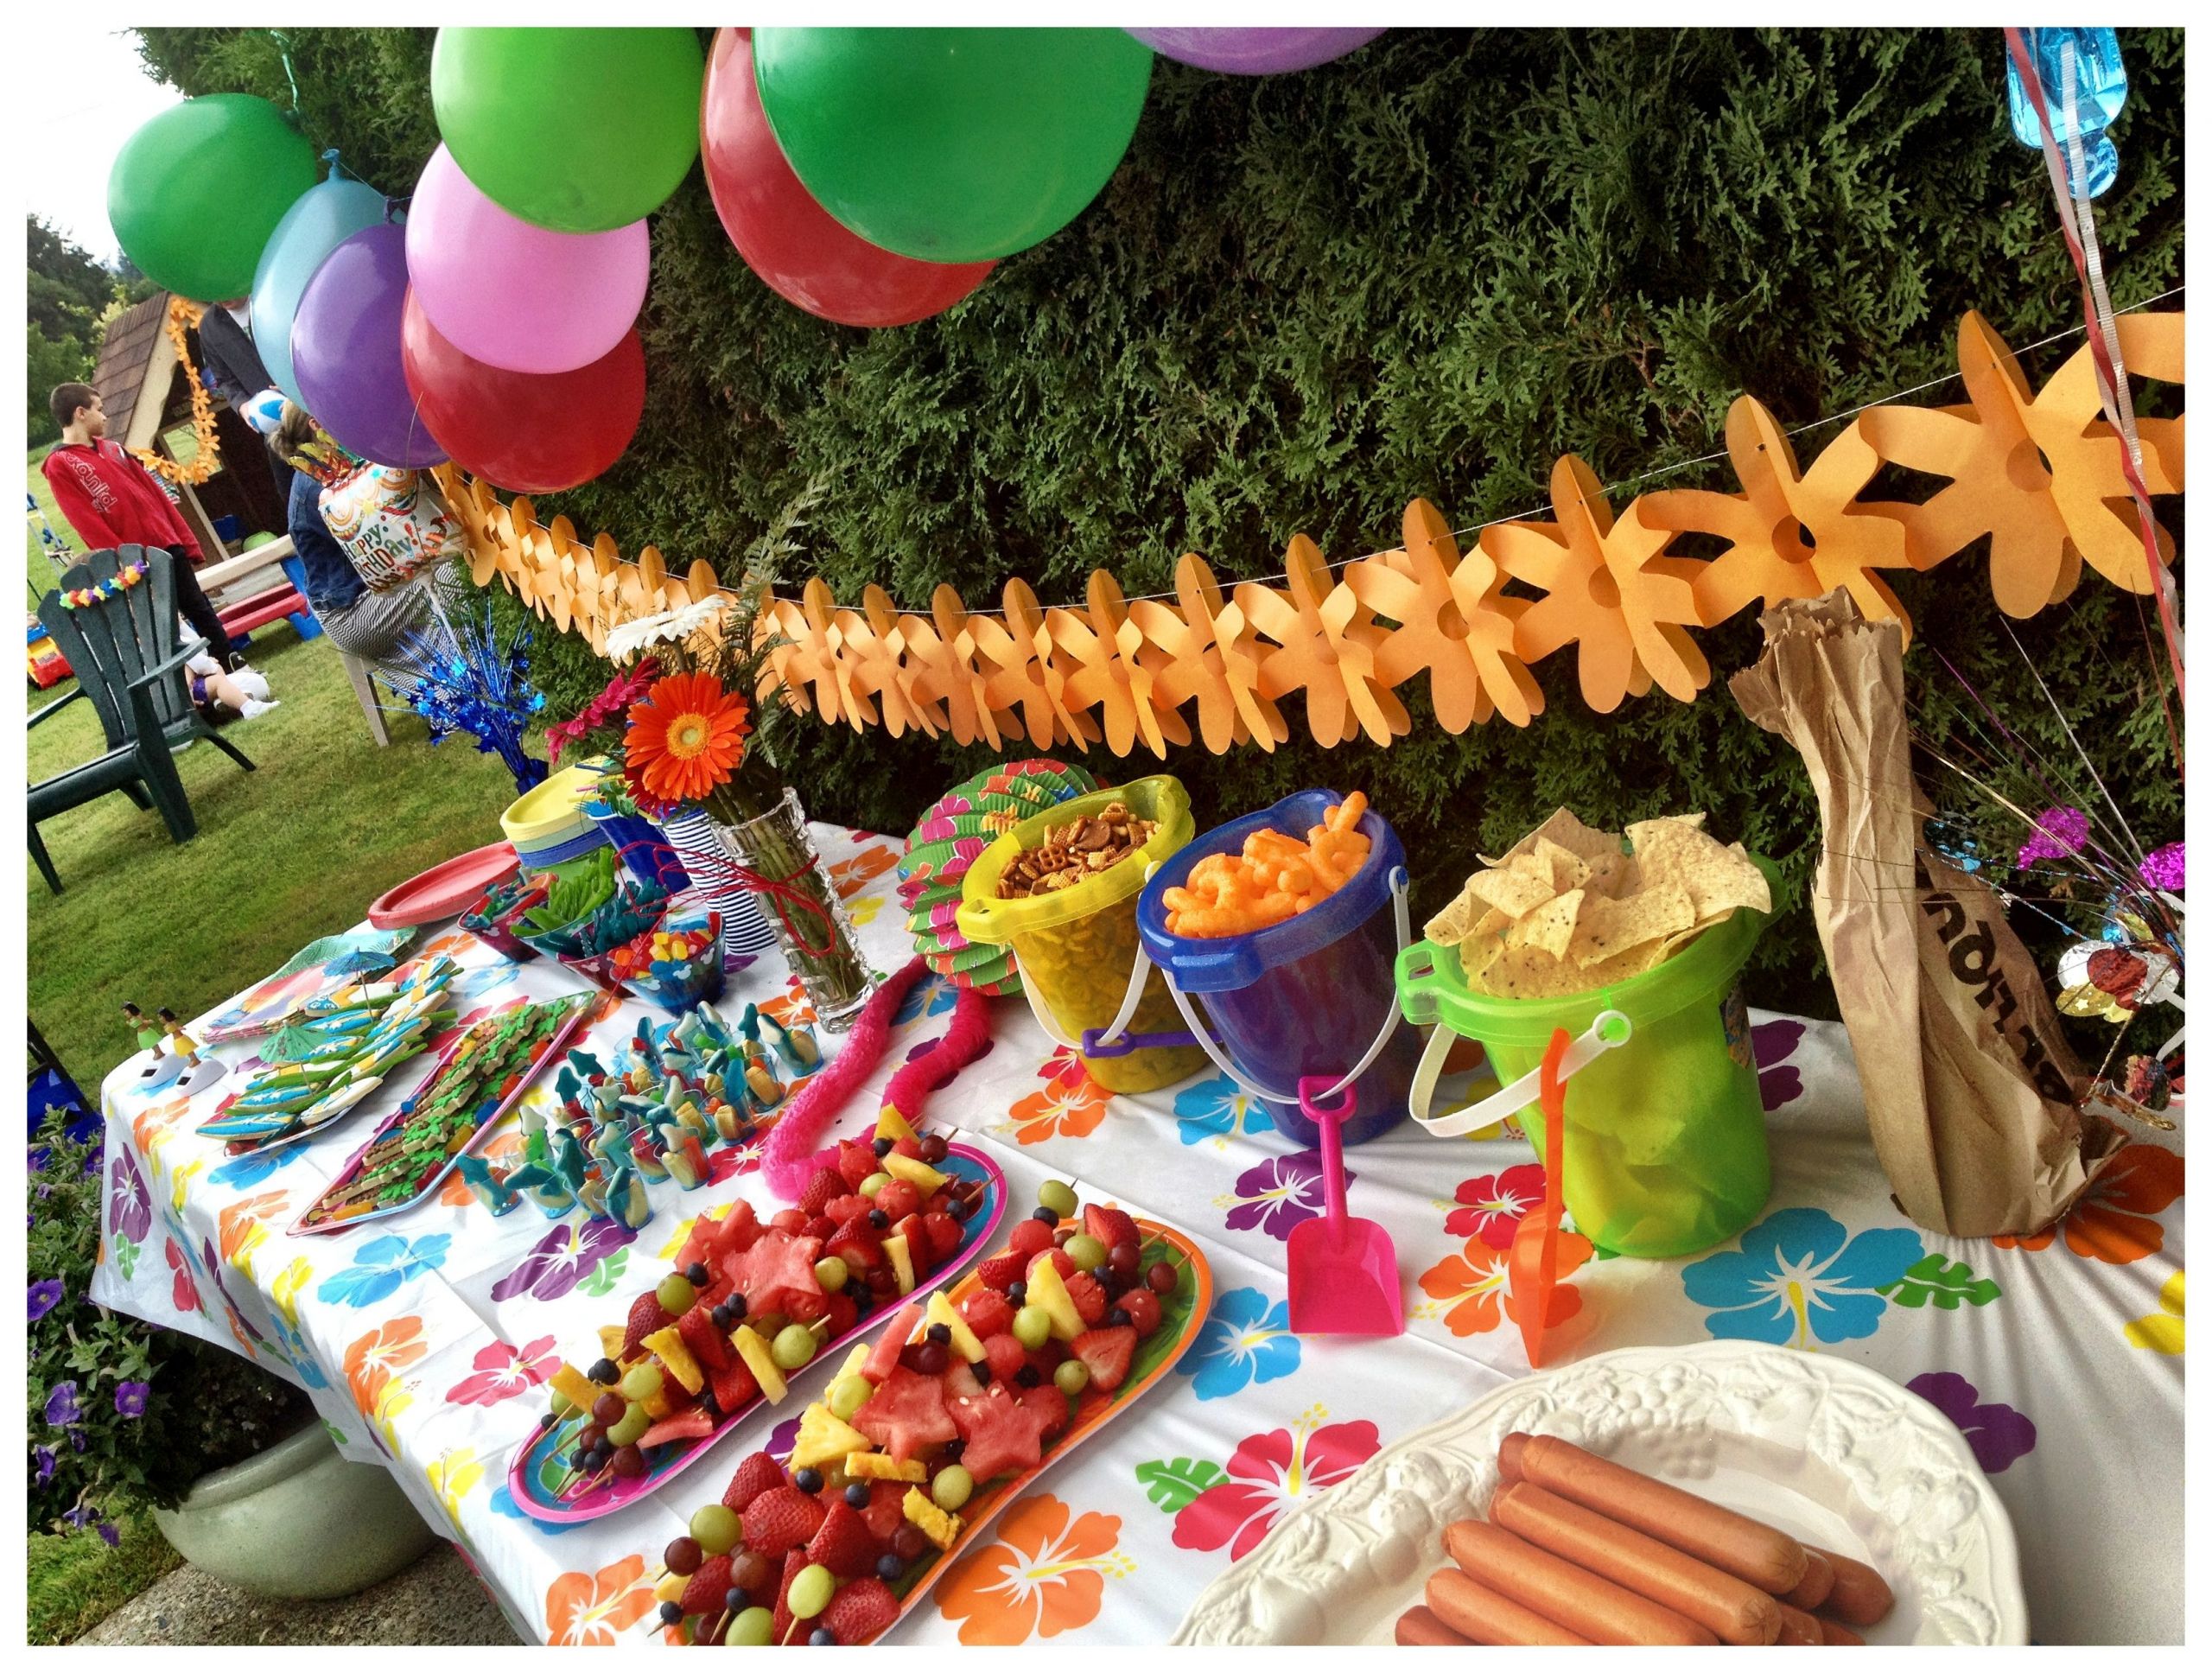 Toddlers Beach Birthday Party Food Ideas
 Kids beach birthday party food table